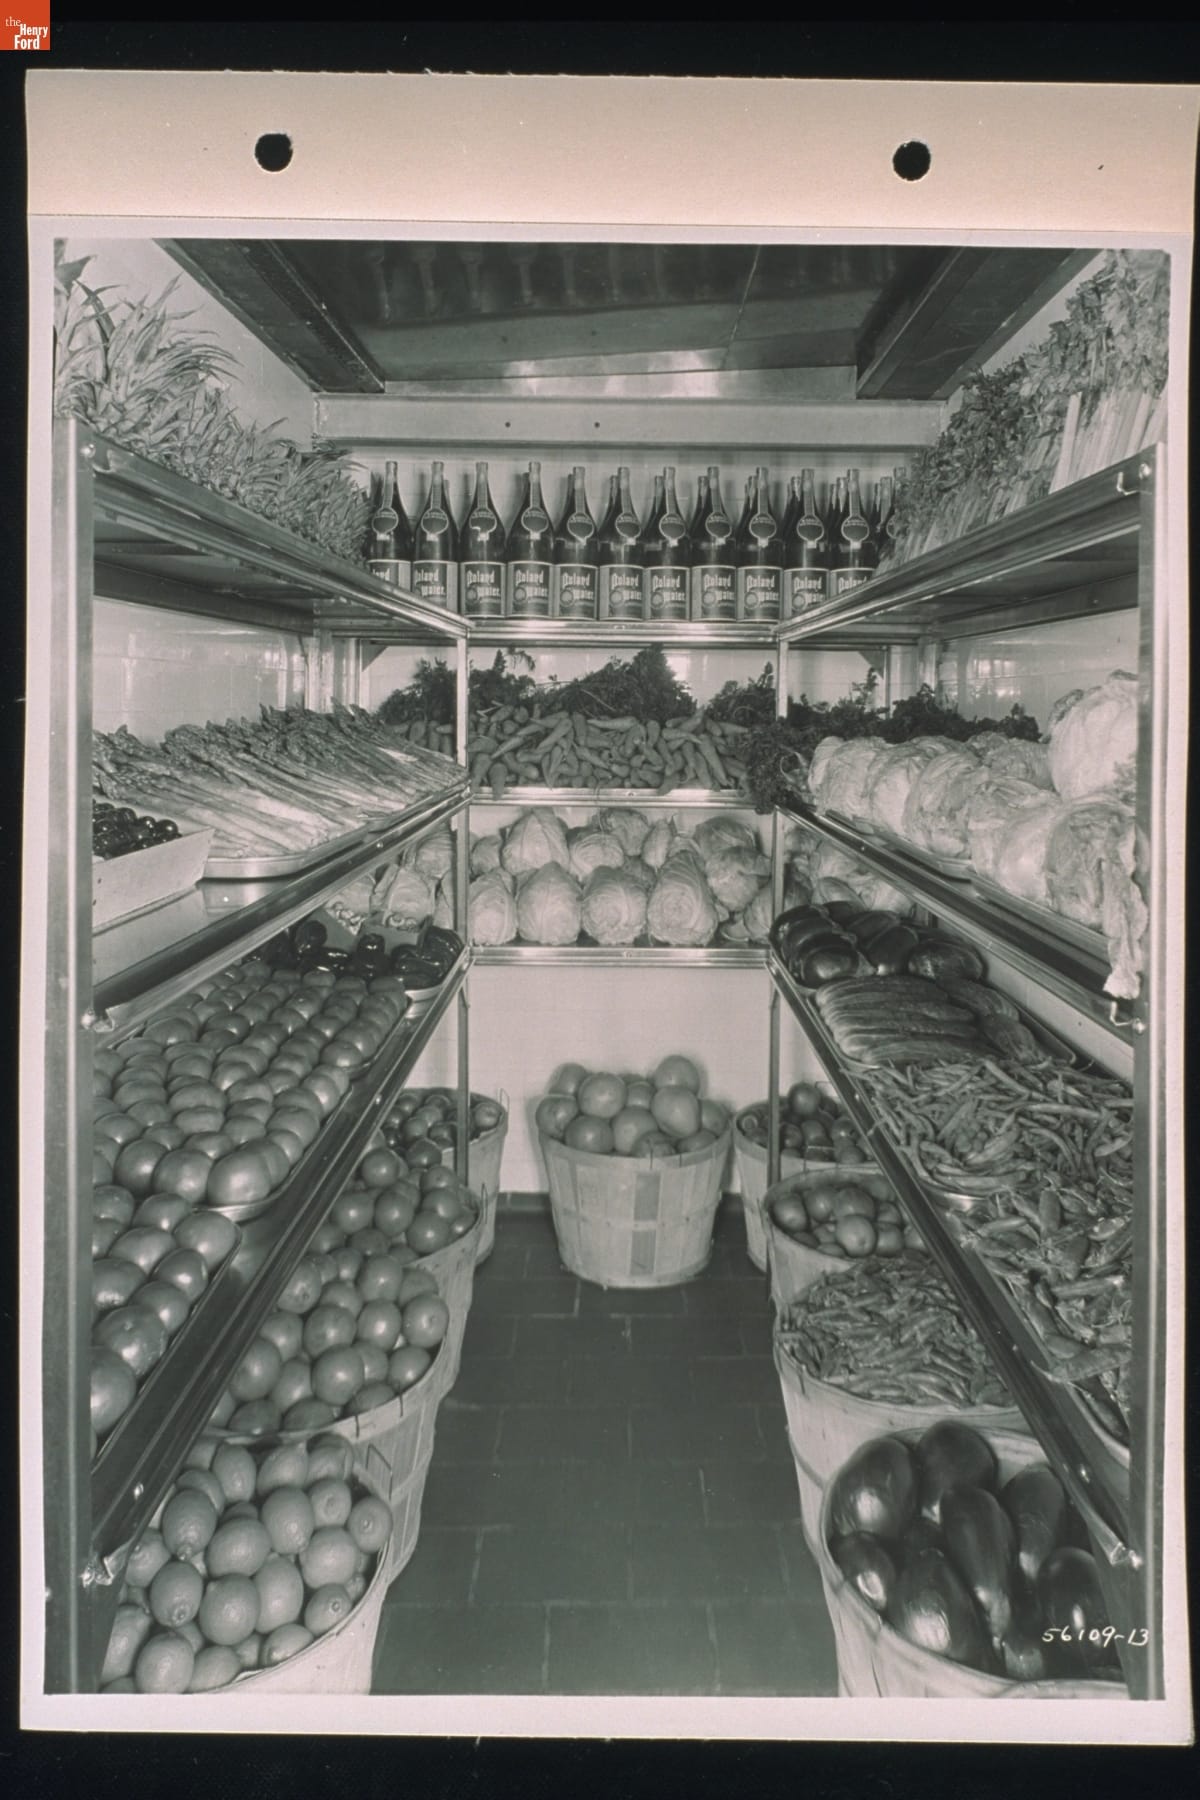  Vegetable cooler, Ford Motor Company cafeteria, May 18, 1931, likely containing produce raised at the Henry Ford Trade School